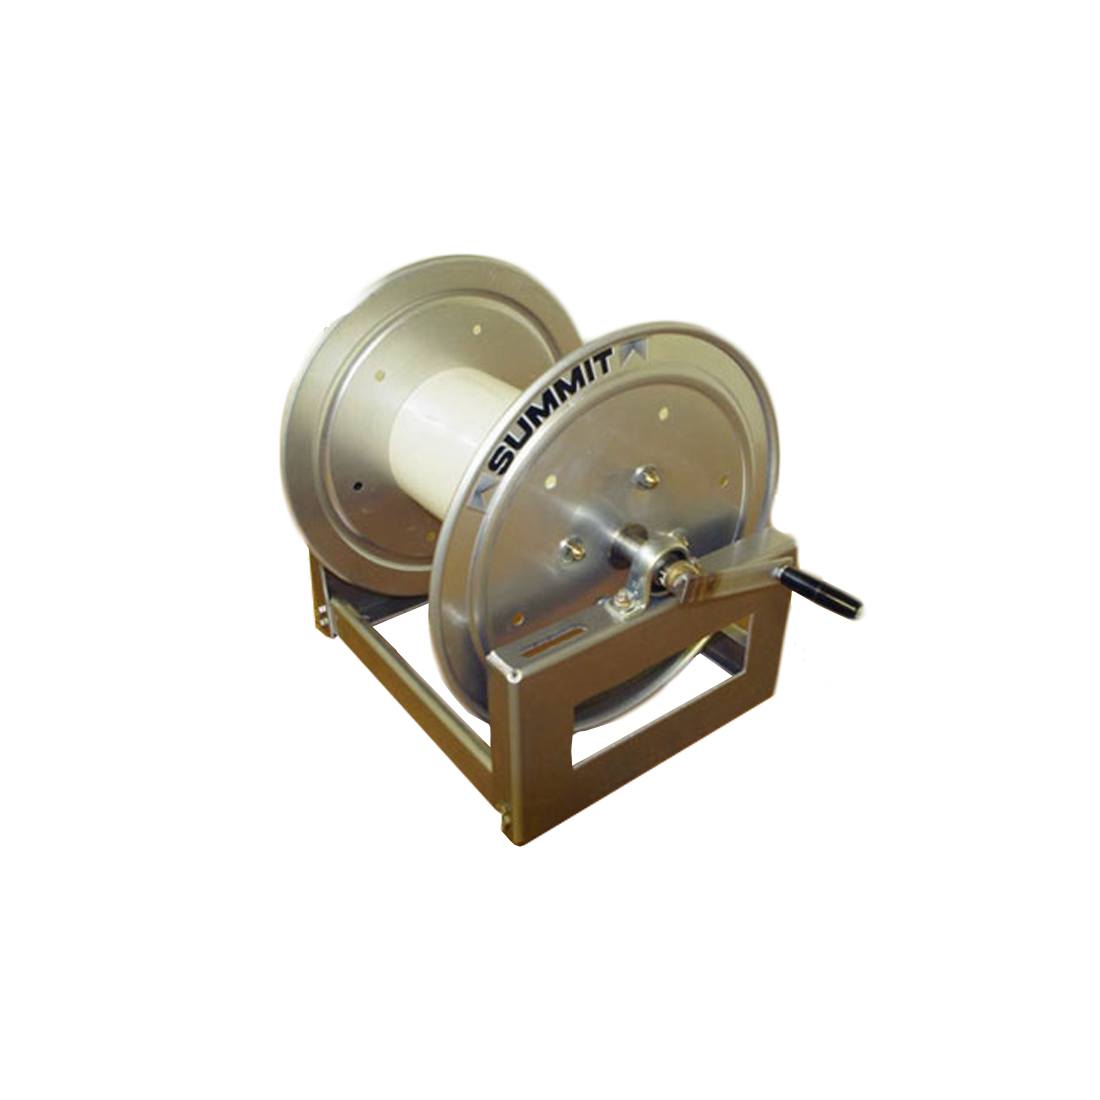 Summit SM Series - Aluminum Hose Reel with 1/2 Inch Inlet - SMA18 - Left Oblique View